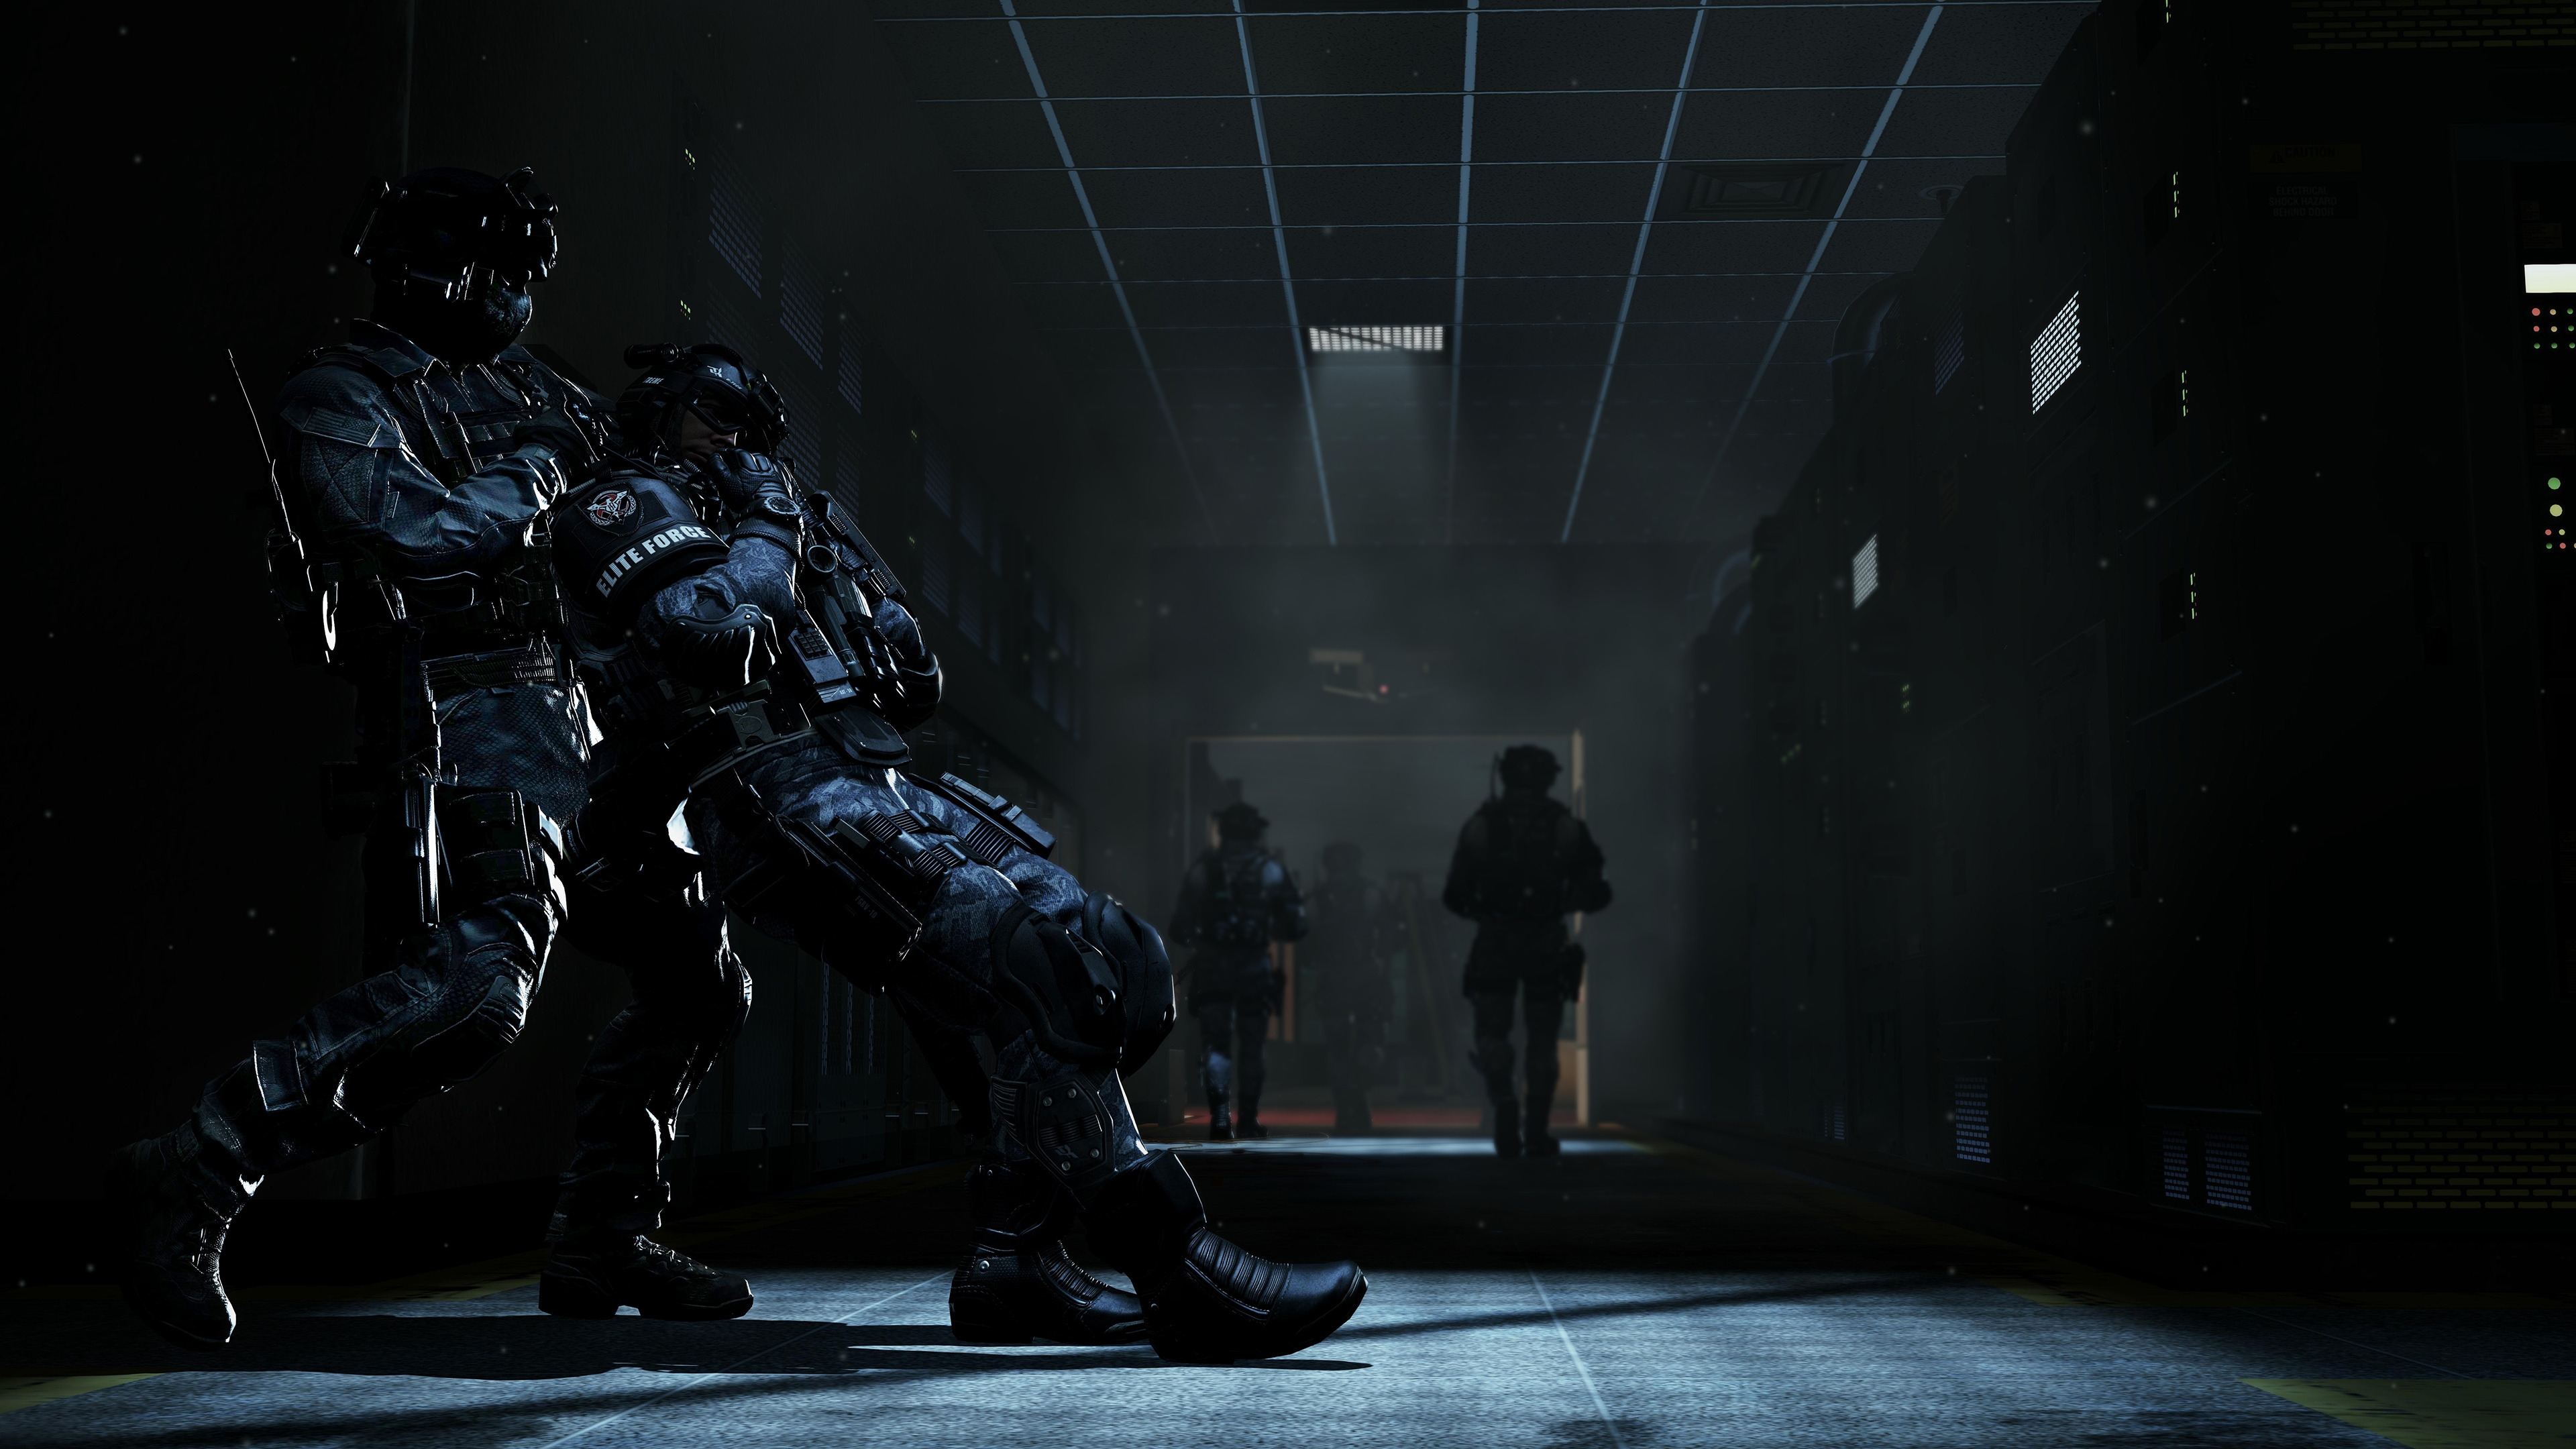 Call of Duty Ghosts Game for 3840 x 2160 Ultra HD resolution